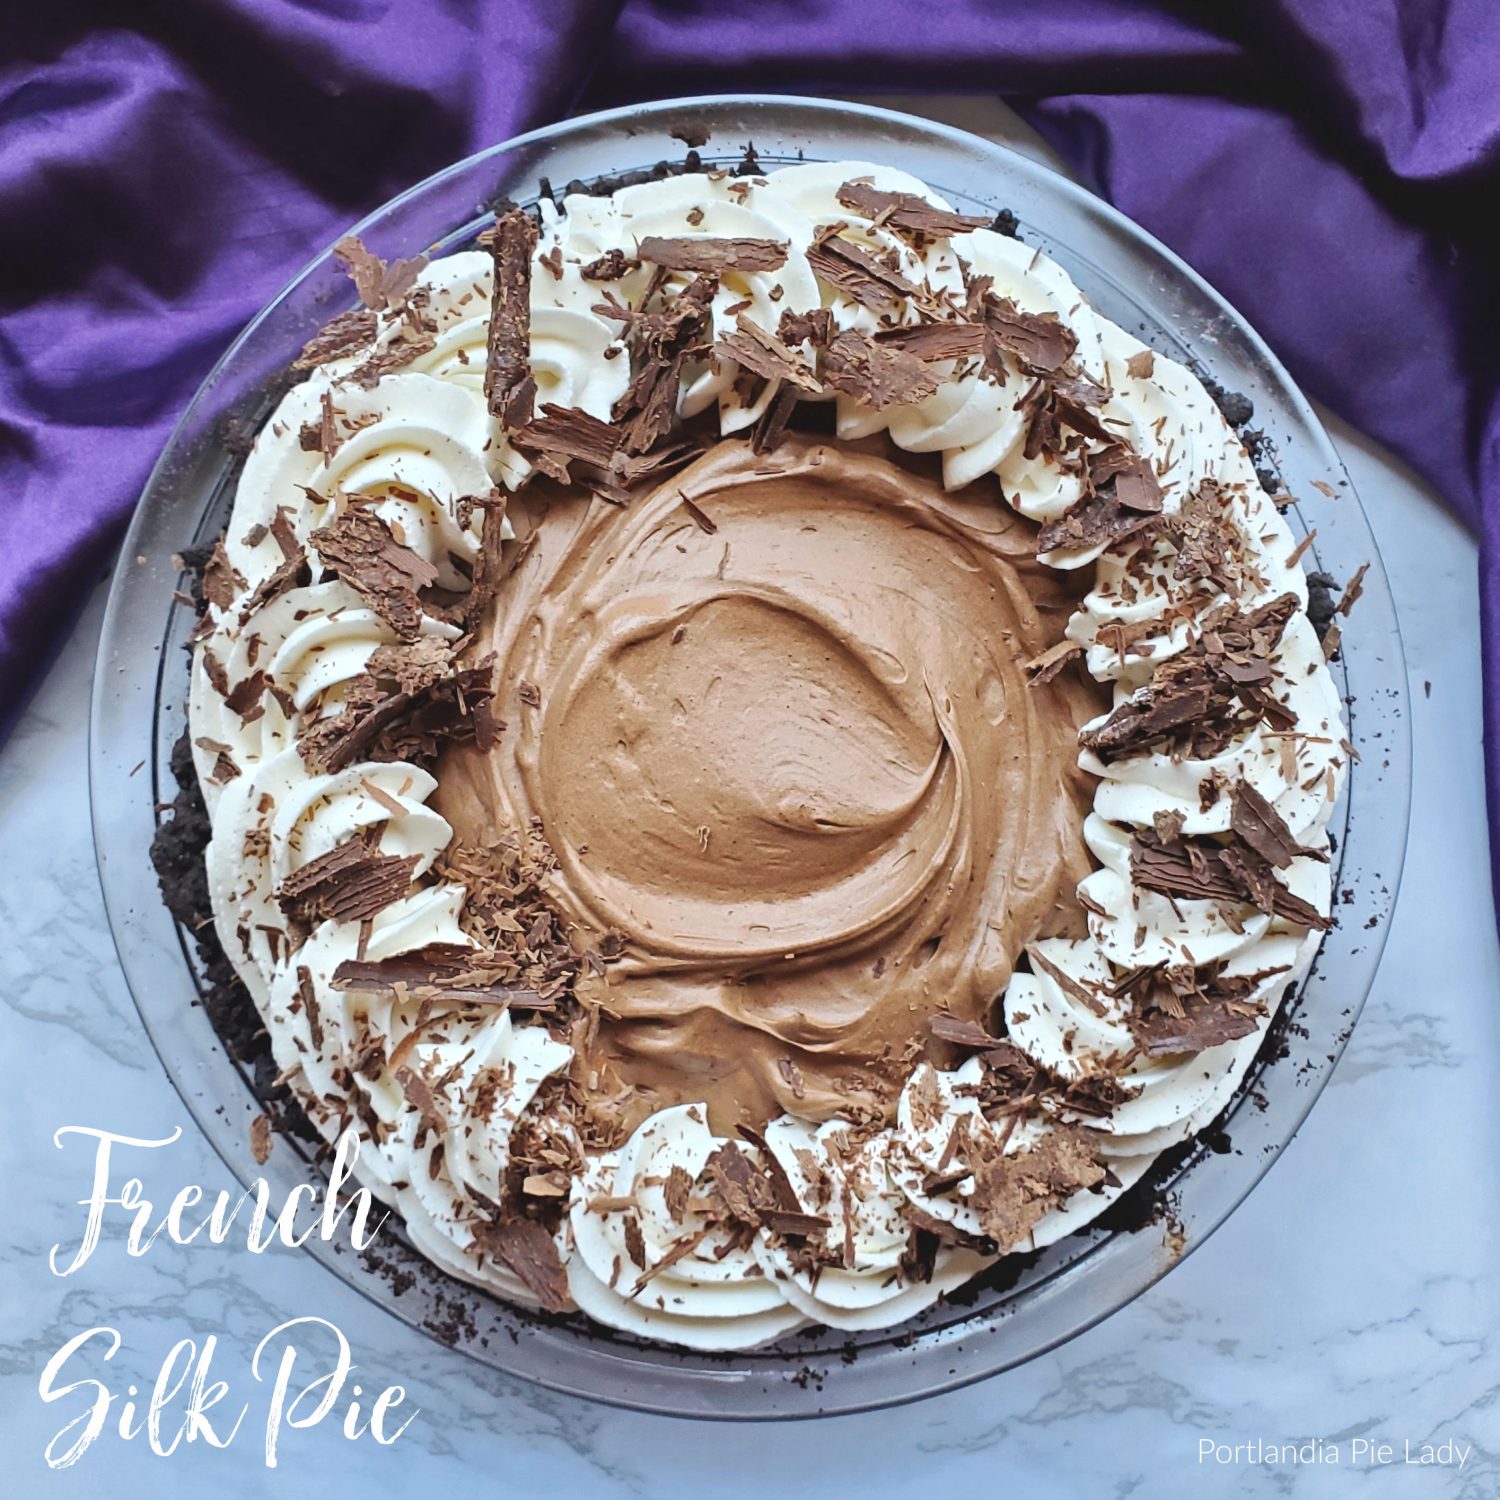 French Silk Pie is a super dreamy creamy mousse-type chocolate pie; every bite is light and velvety smooth, and garnished with homemade chocolate curls.  